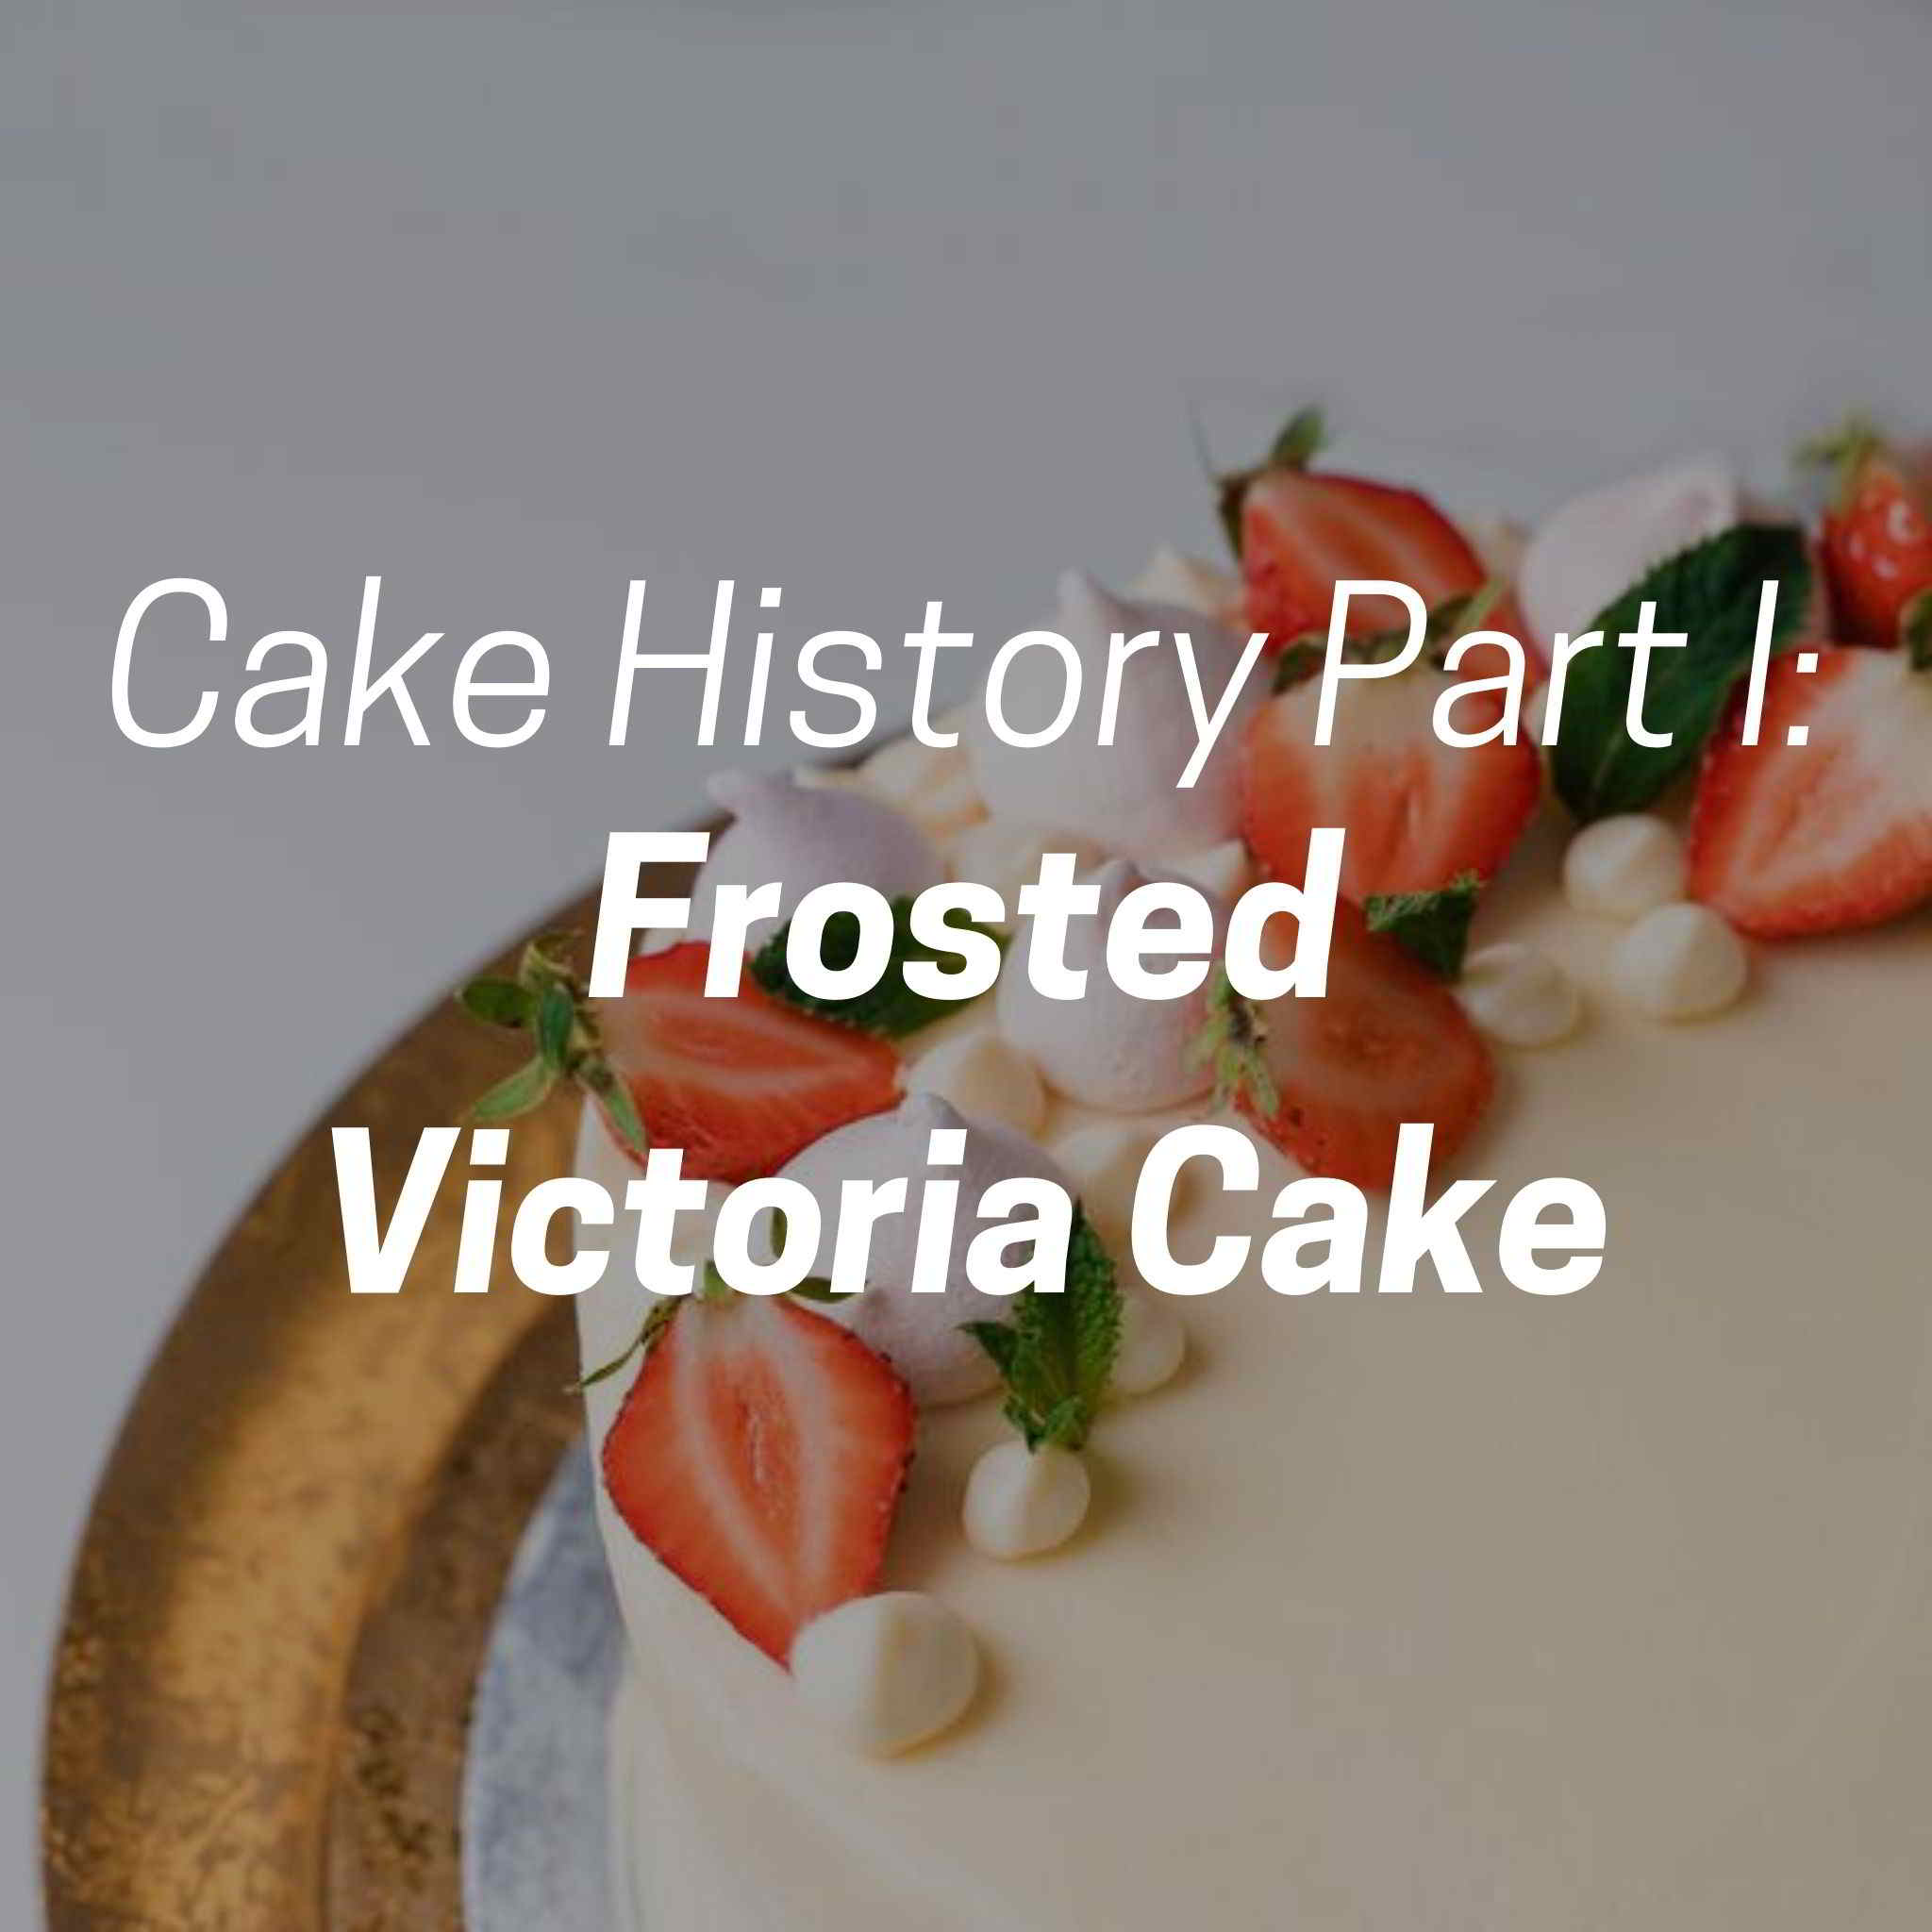 Cake History Part I: Frosted Victoria Cake